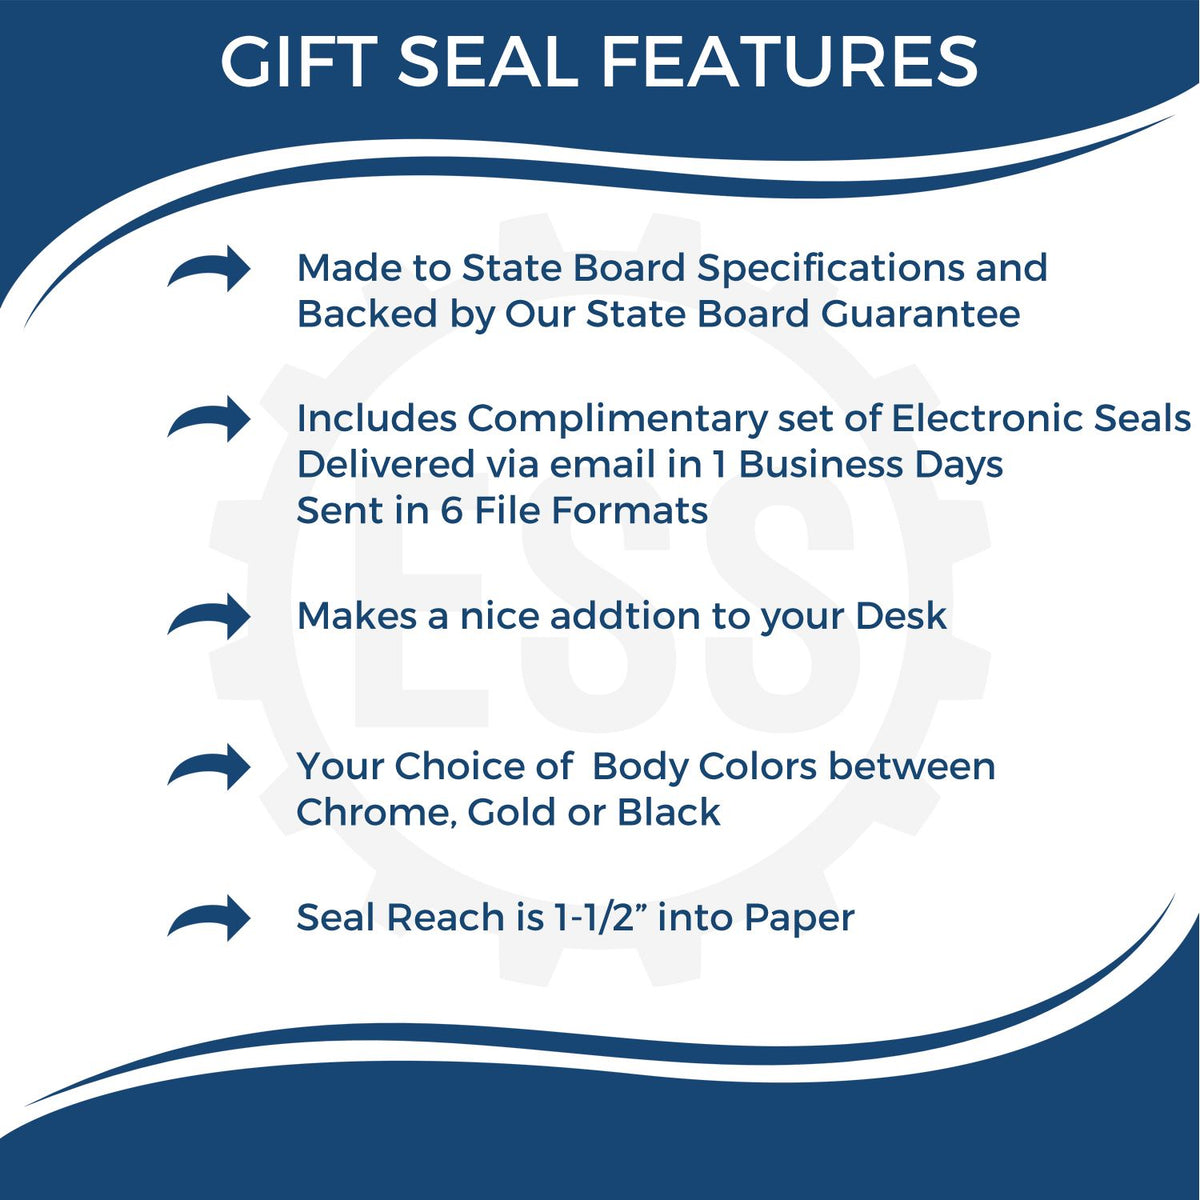 A picture of an infographic highlighting the selling points for the Gift South Carolina Engineer Seal